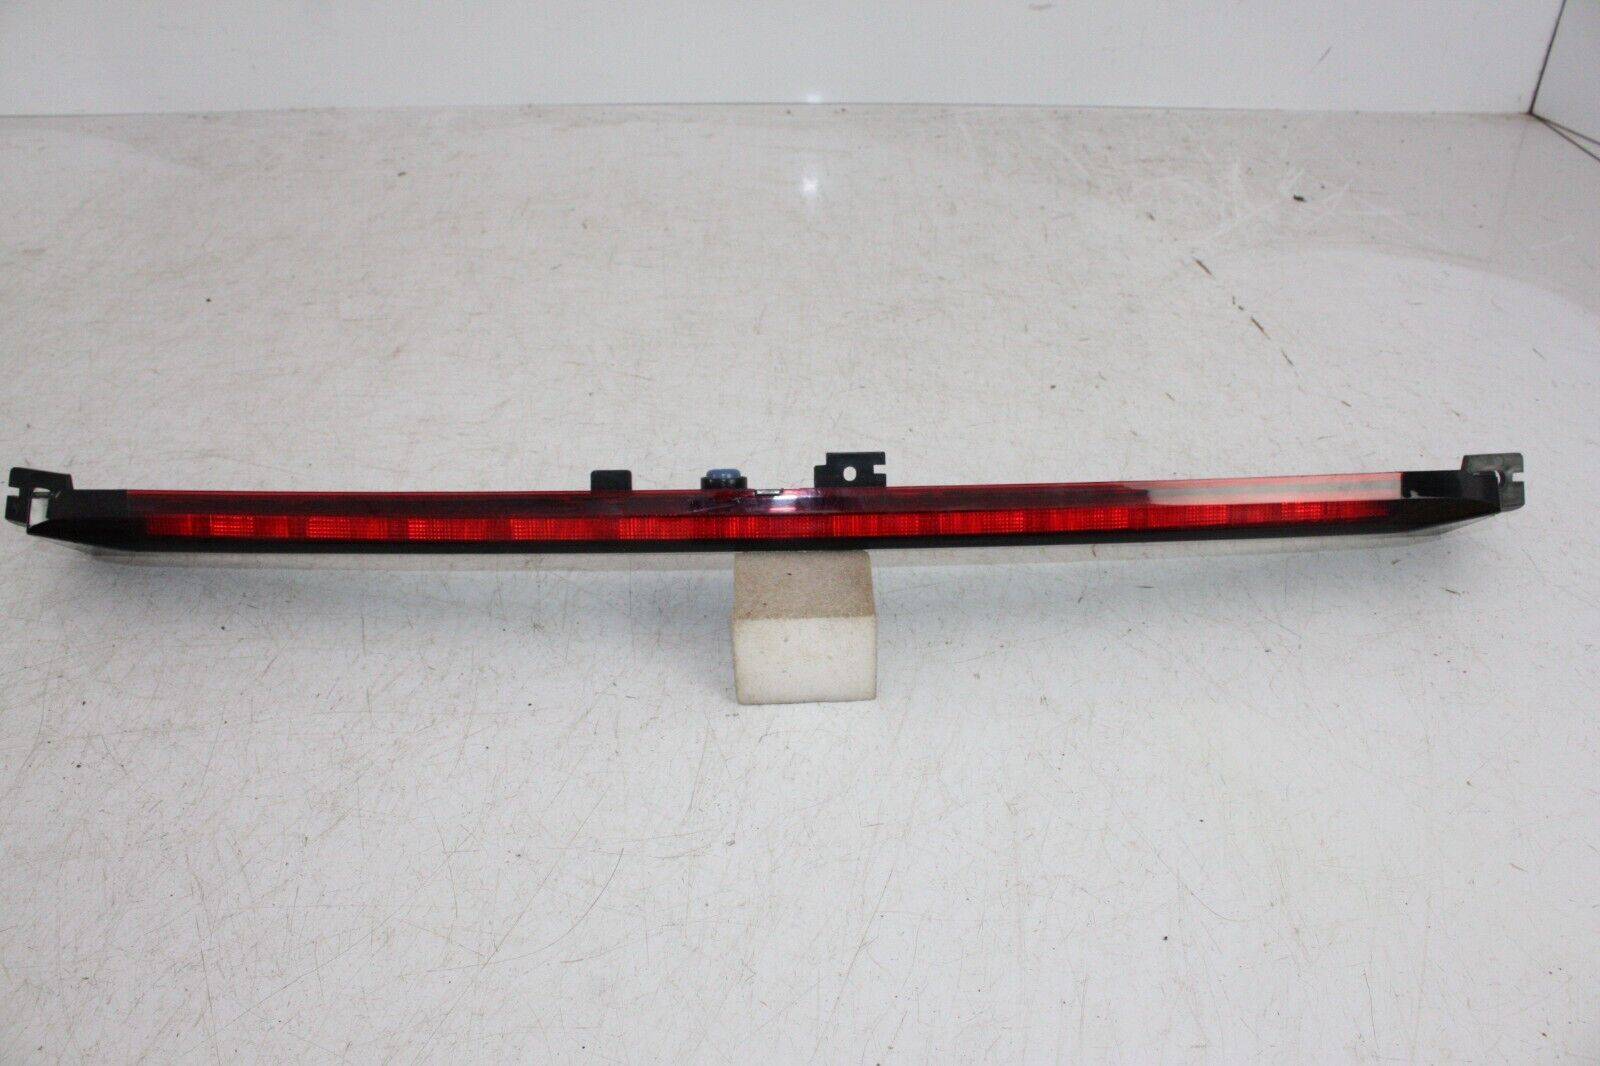 VOLVO XC90 REAR HIGH MOUNT TAILGATE STOP LAMP LIGHT 2015 ON 31353169 175429934723